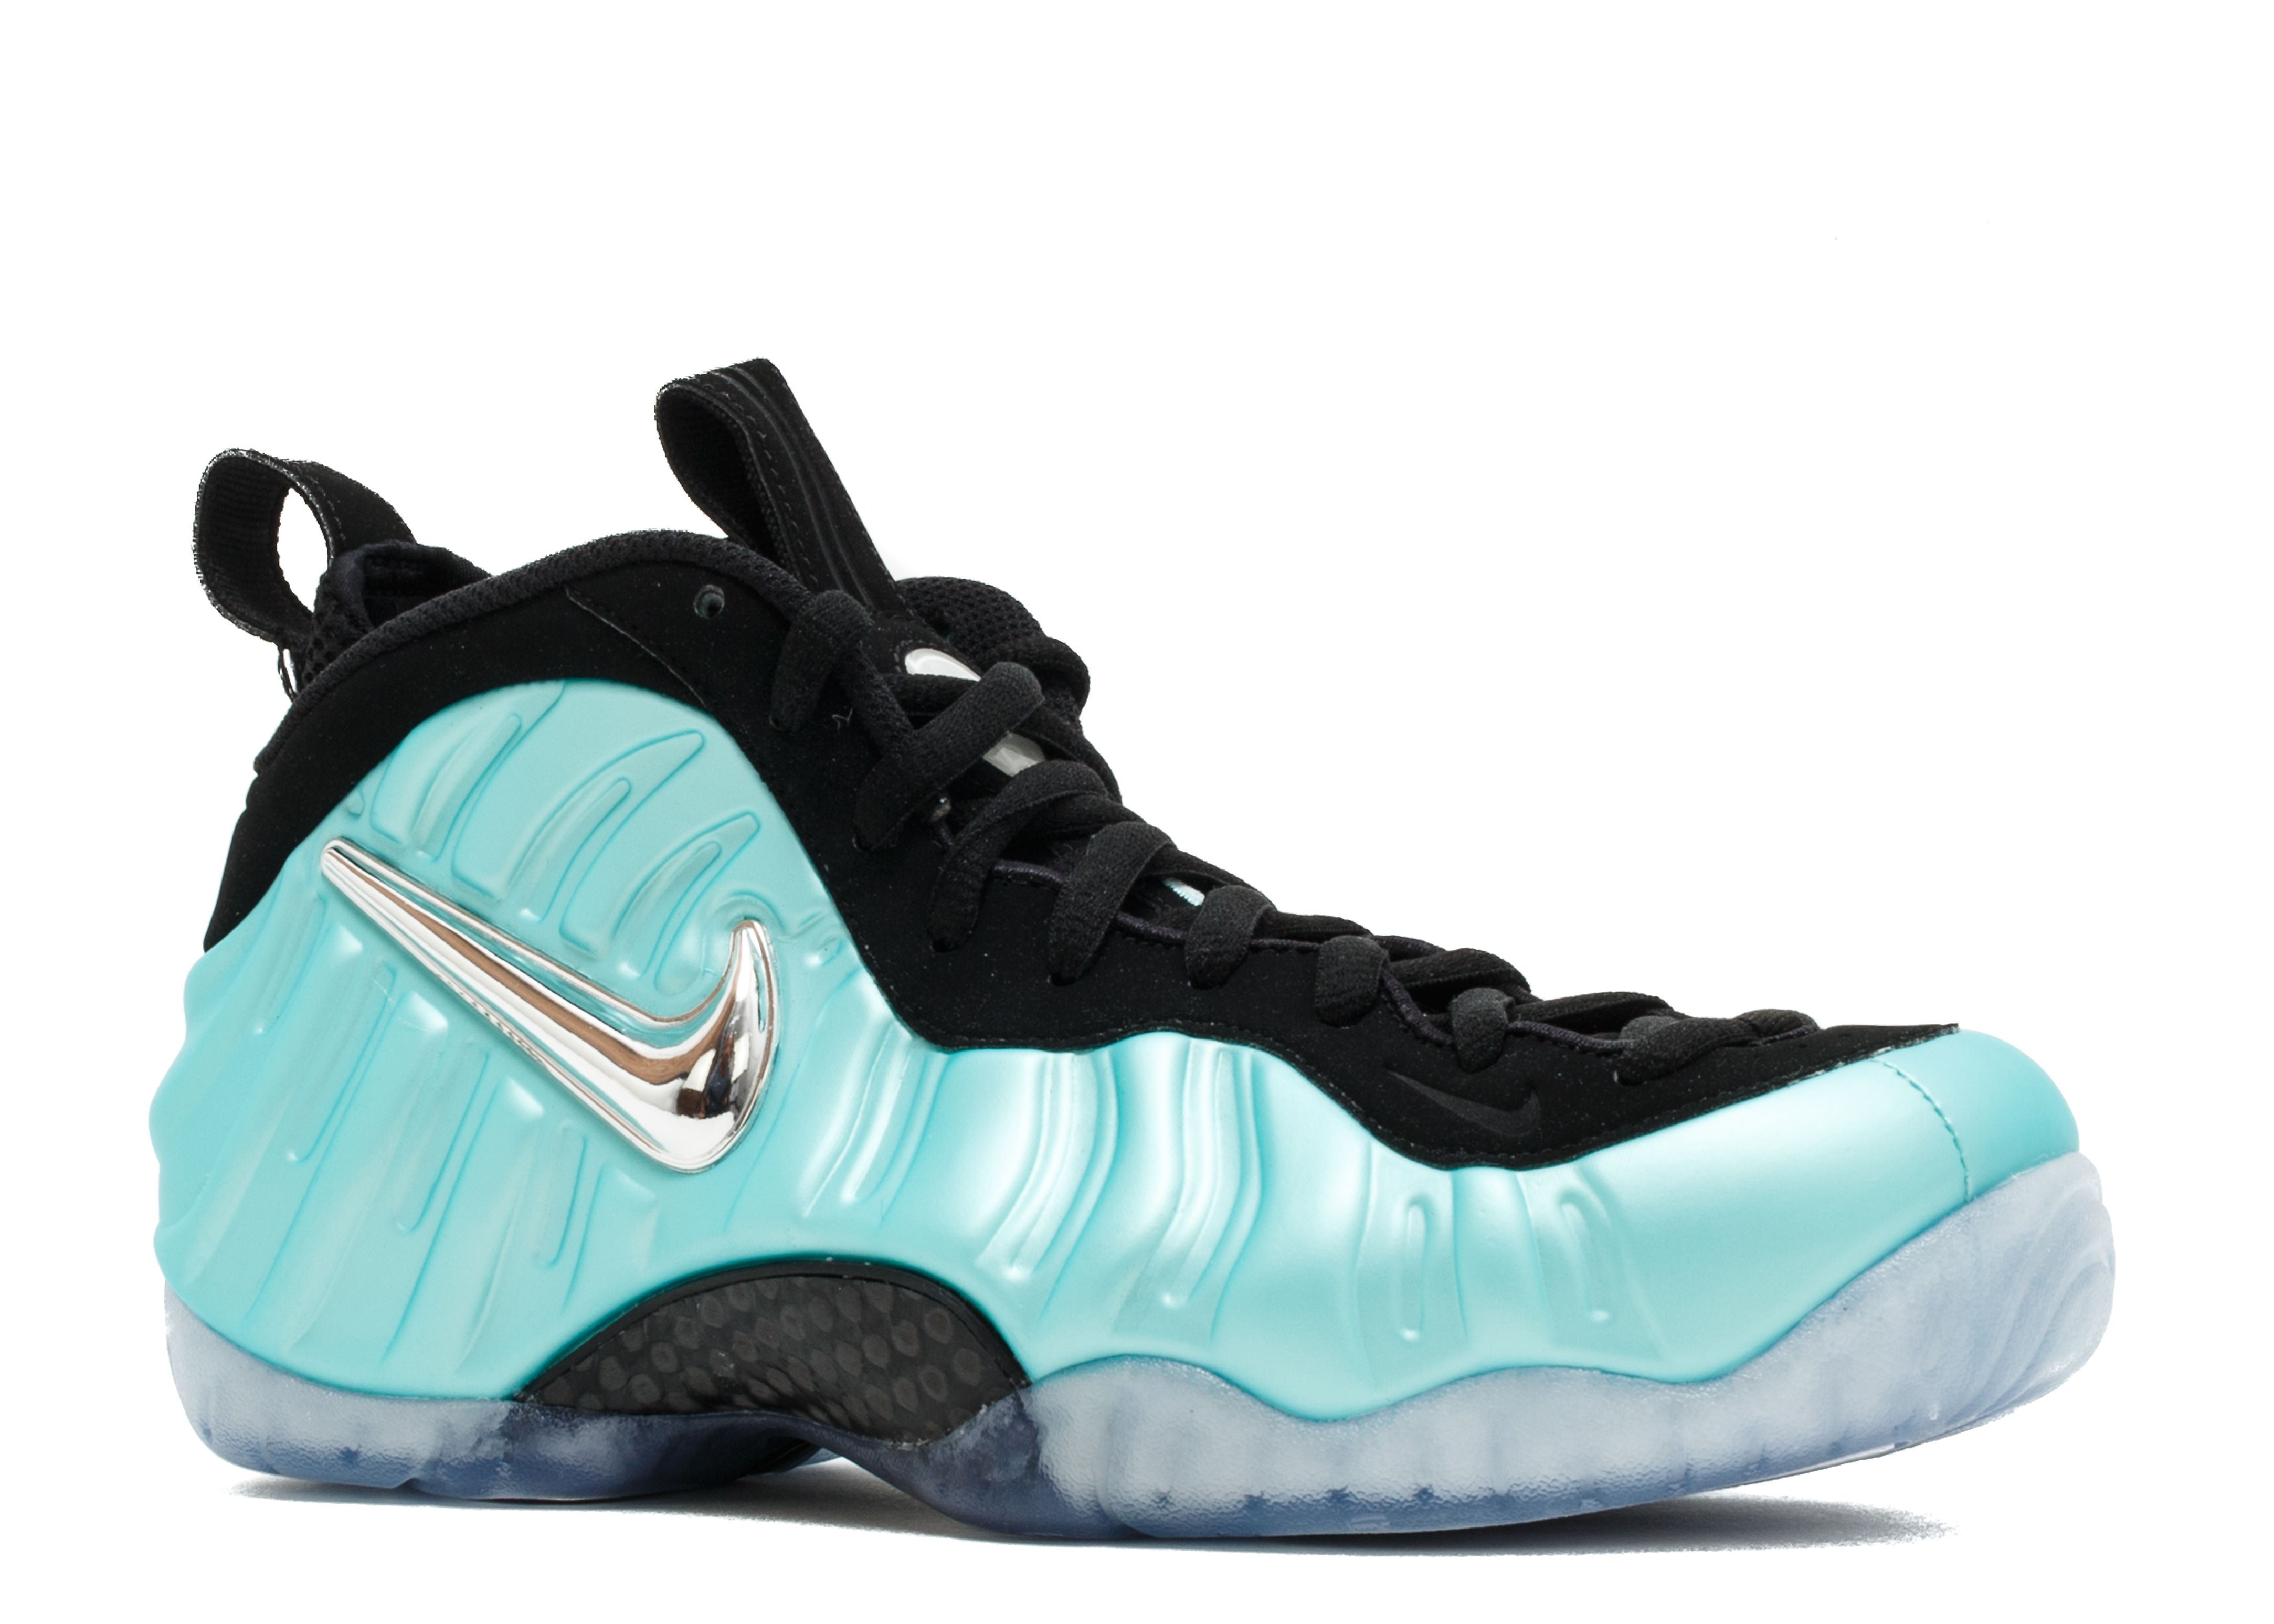 teal and black foamposites